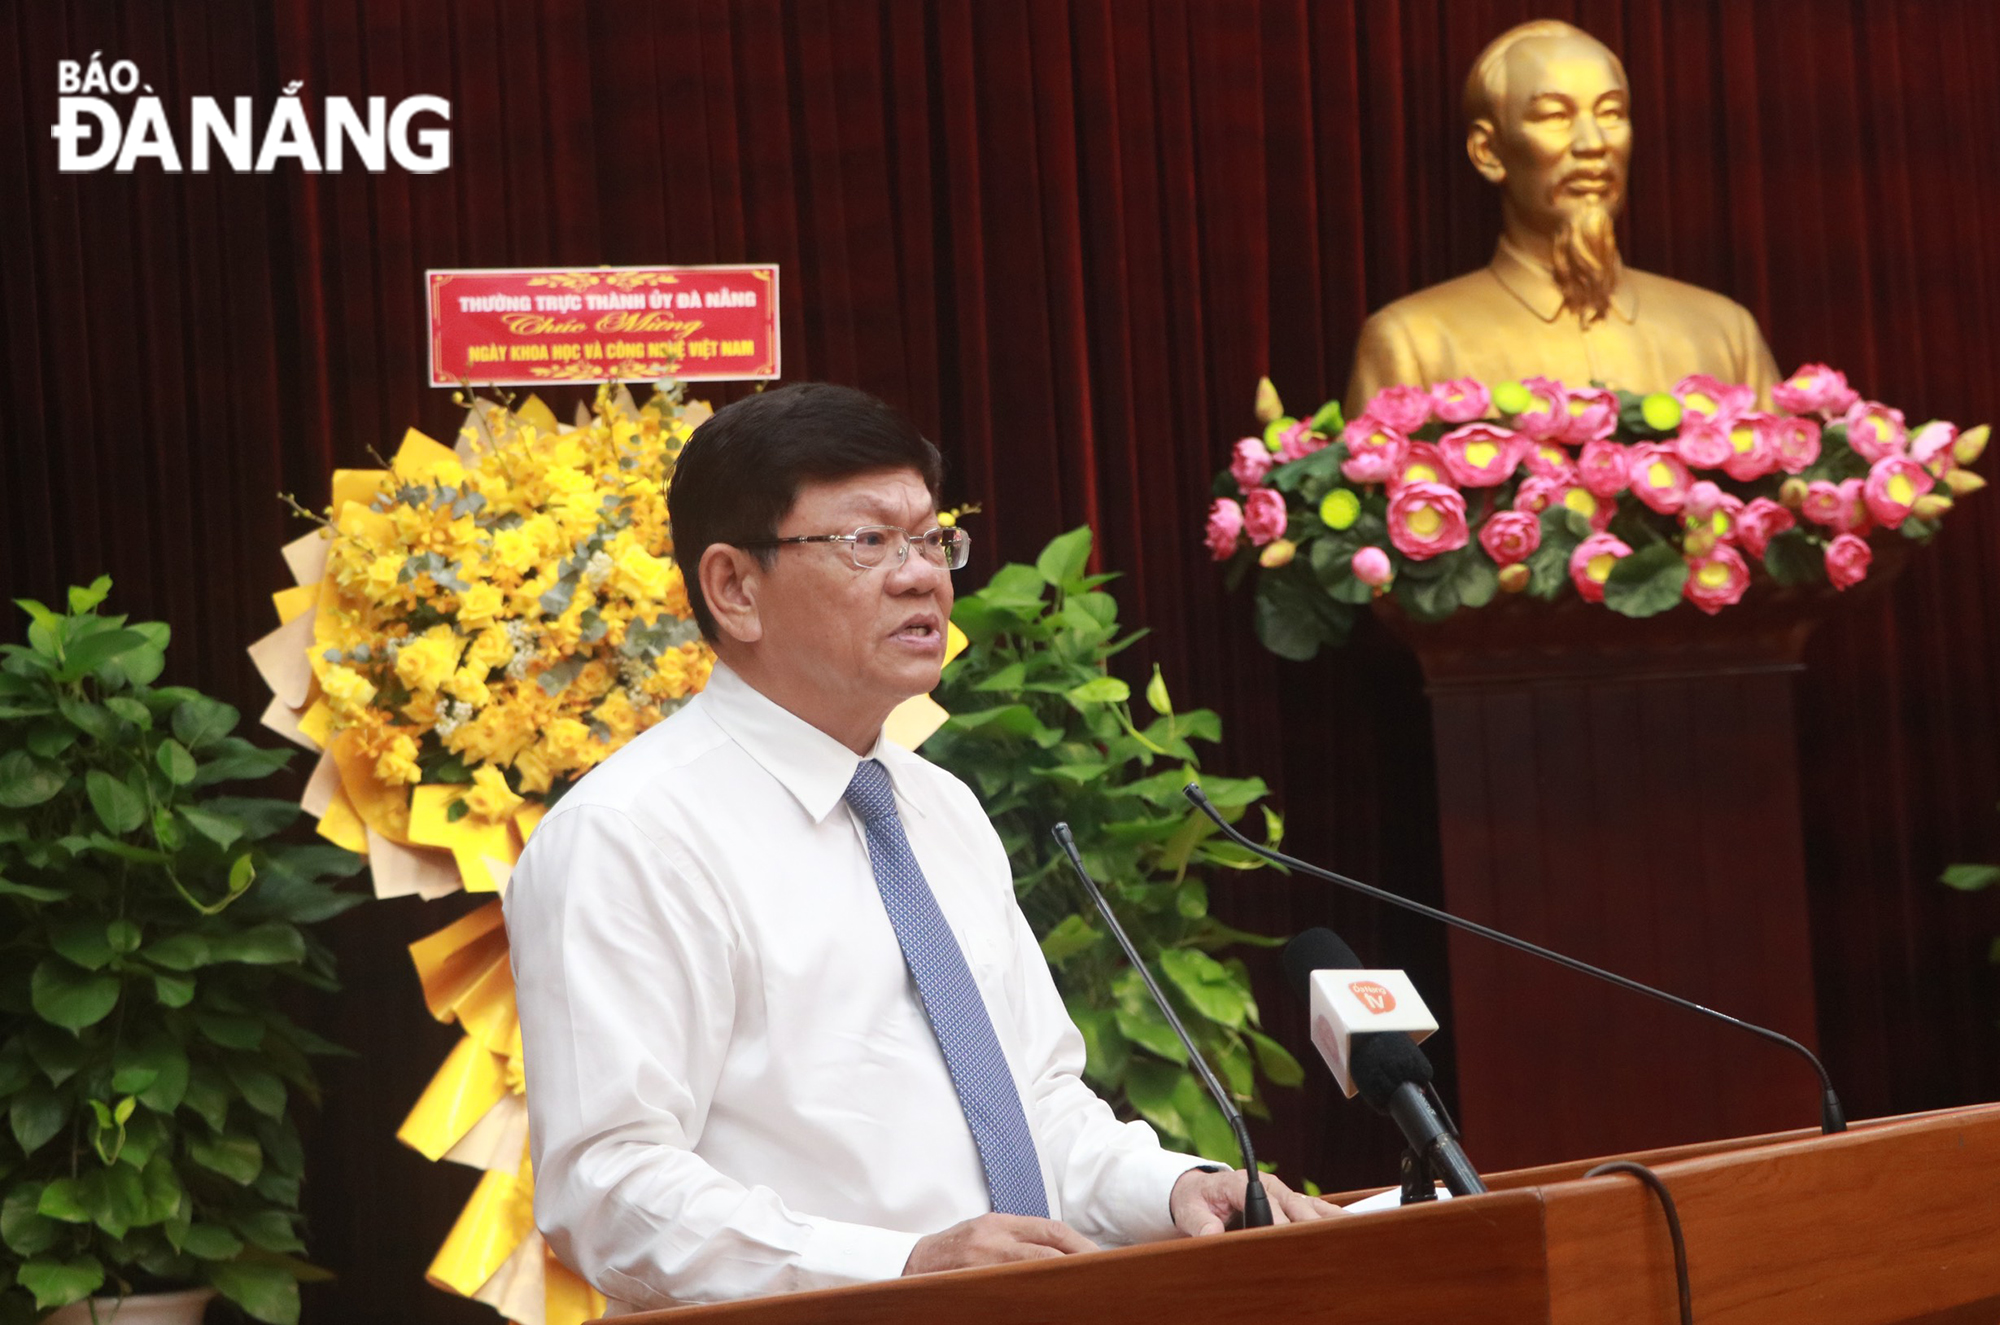 Dr. Vo Cong Tri, Chairman of the city’s Union of Science and Technology Associations, at the event